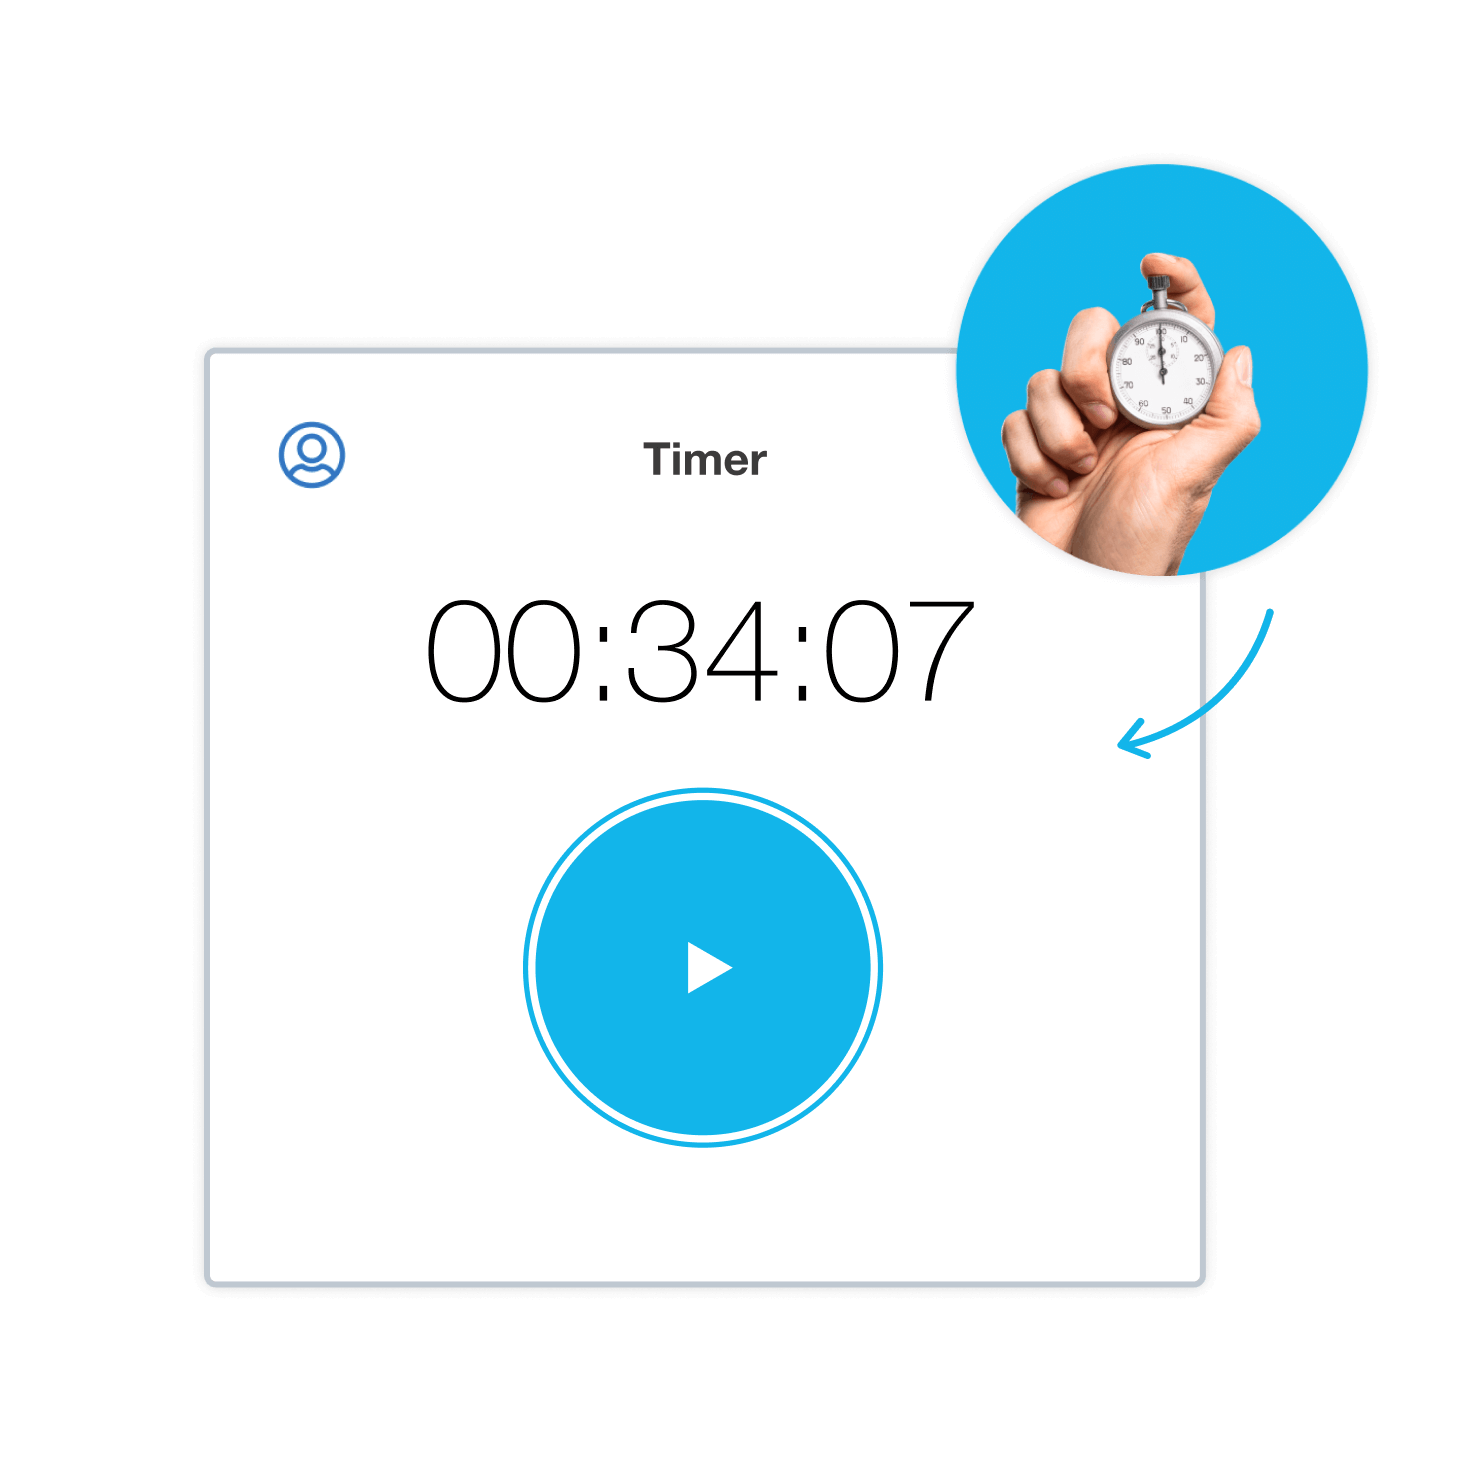 An employee clicks to restart the start-stop timer in their time tracking software which has already recorded 34 minutes on the job.